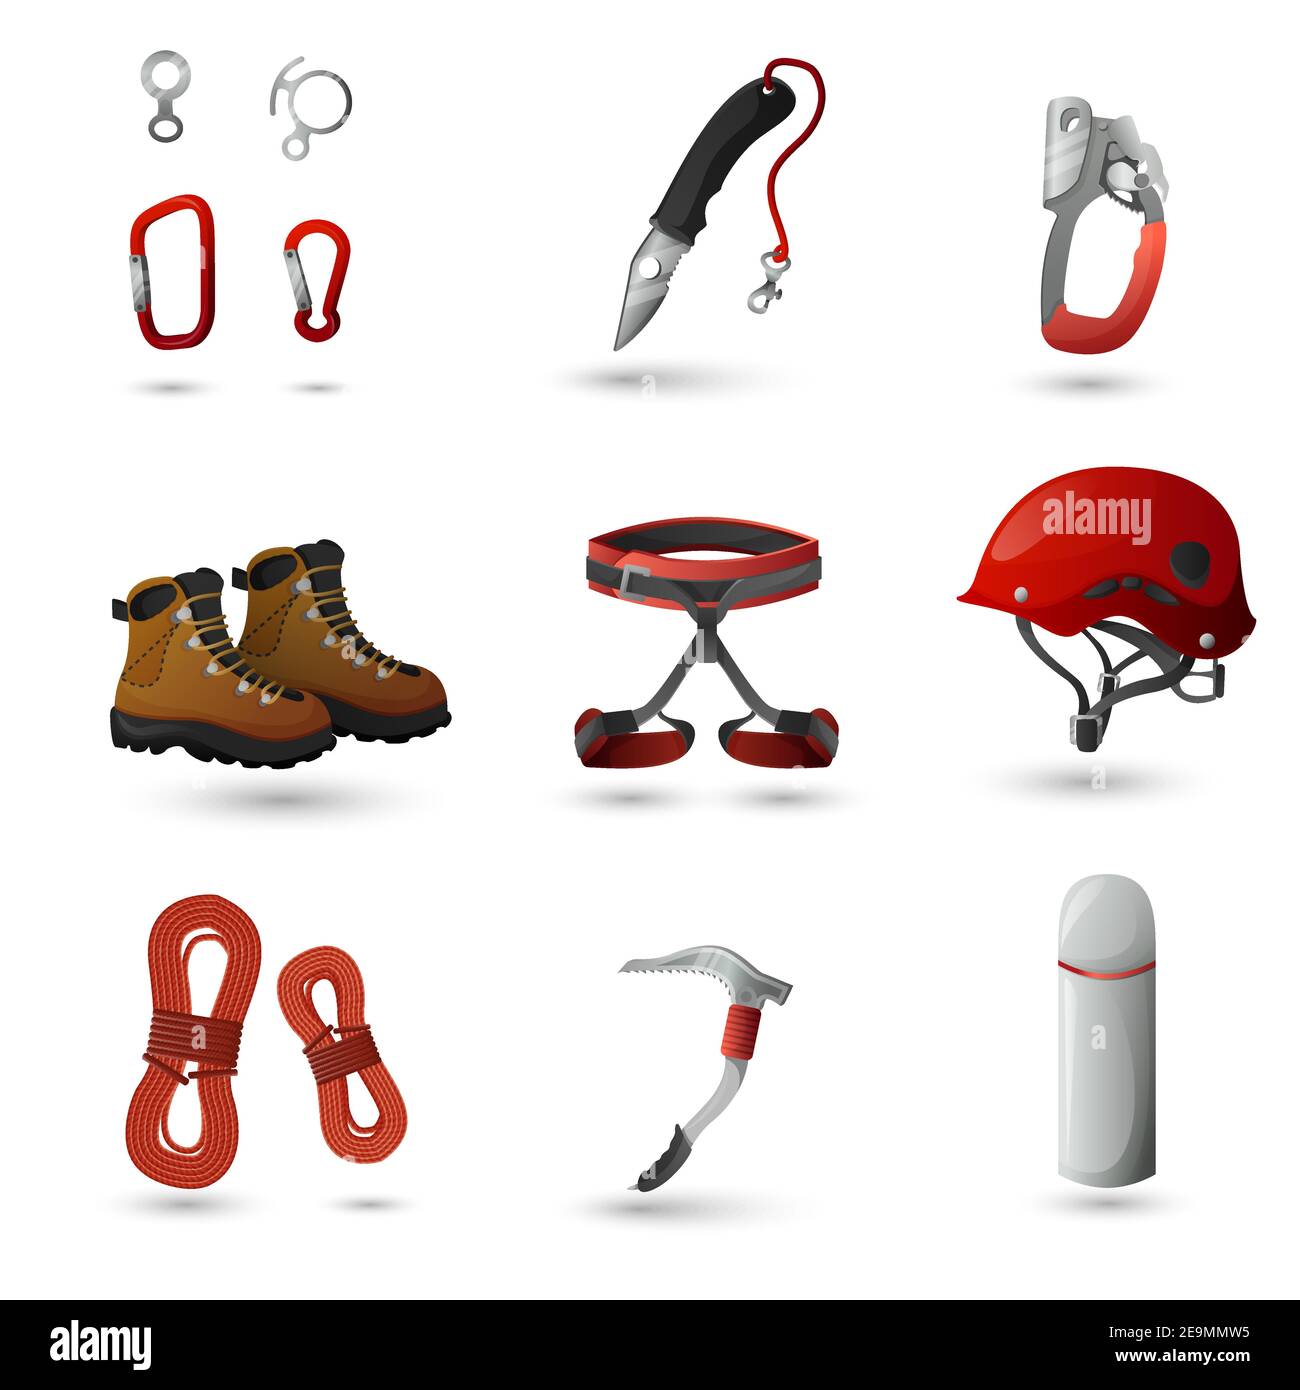 Mountain climbing equipment tools and accessories icons set with ice axe and harness abstract isolated vector illustration Stock Vector